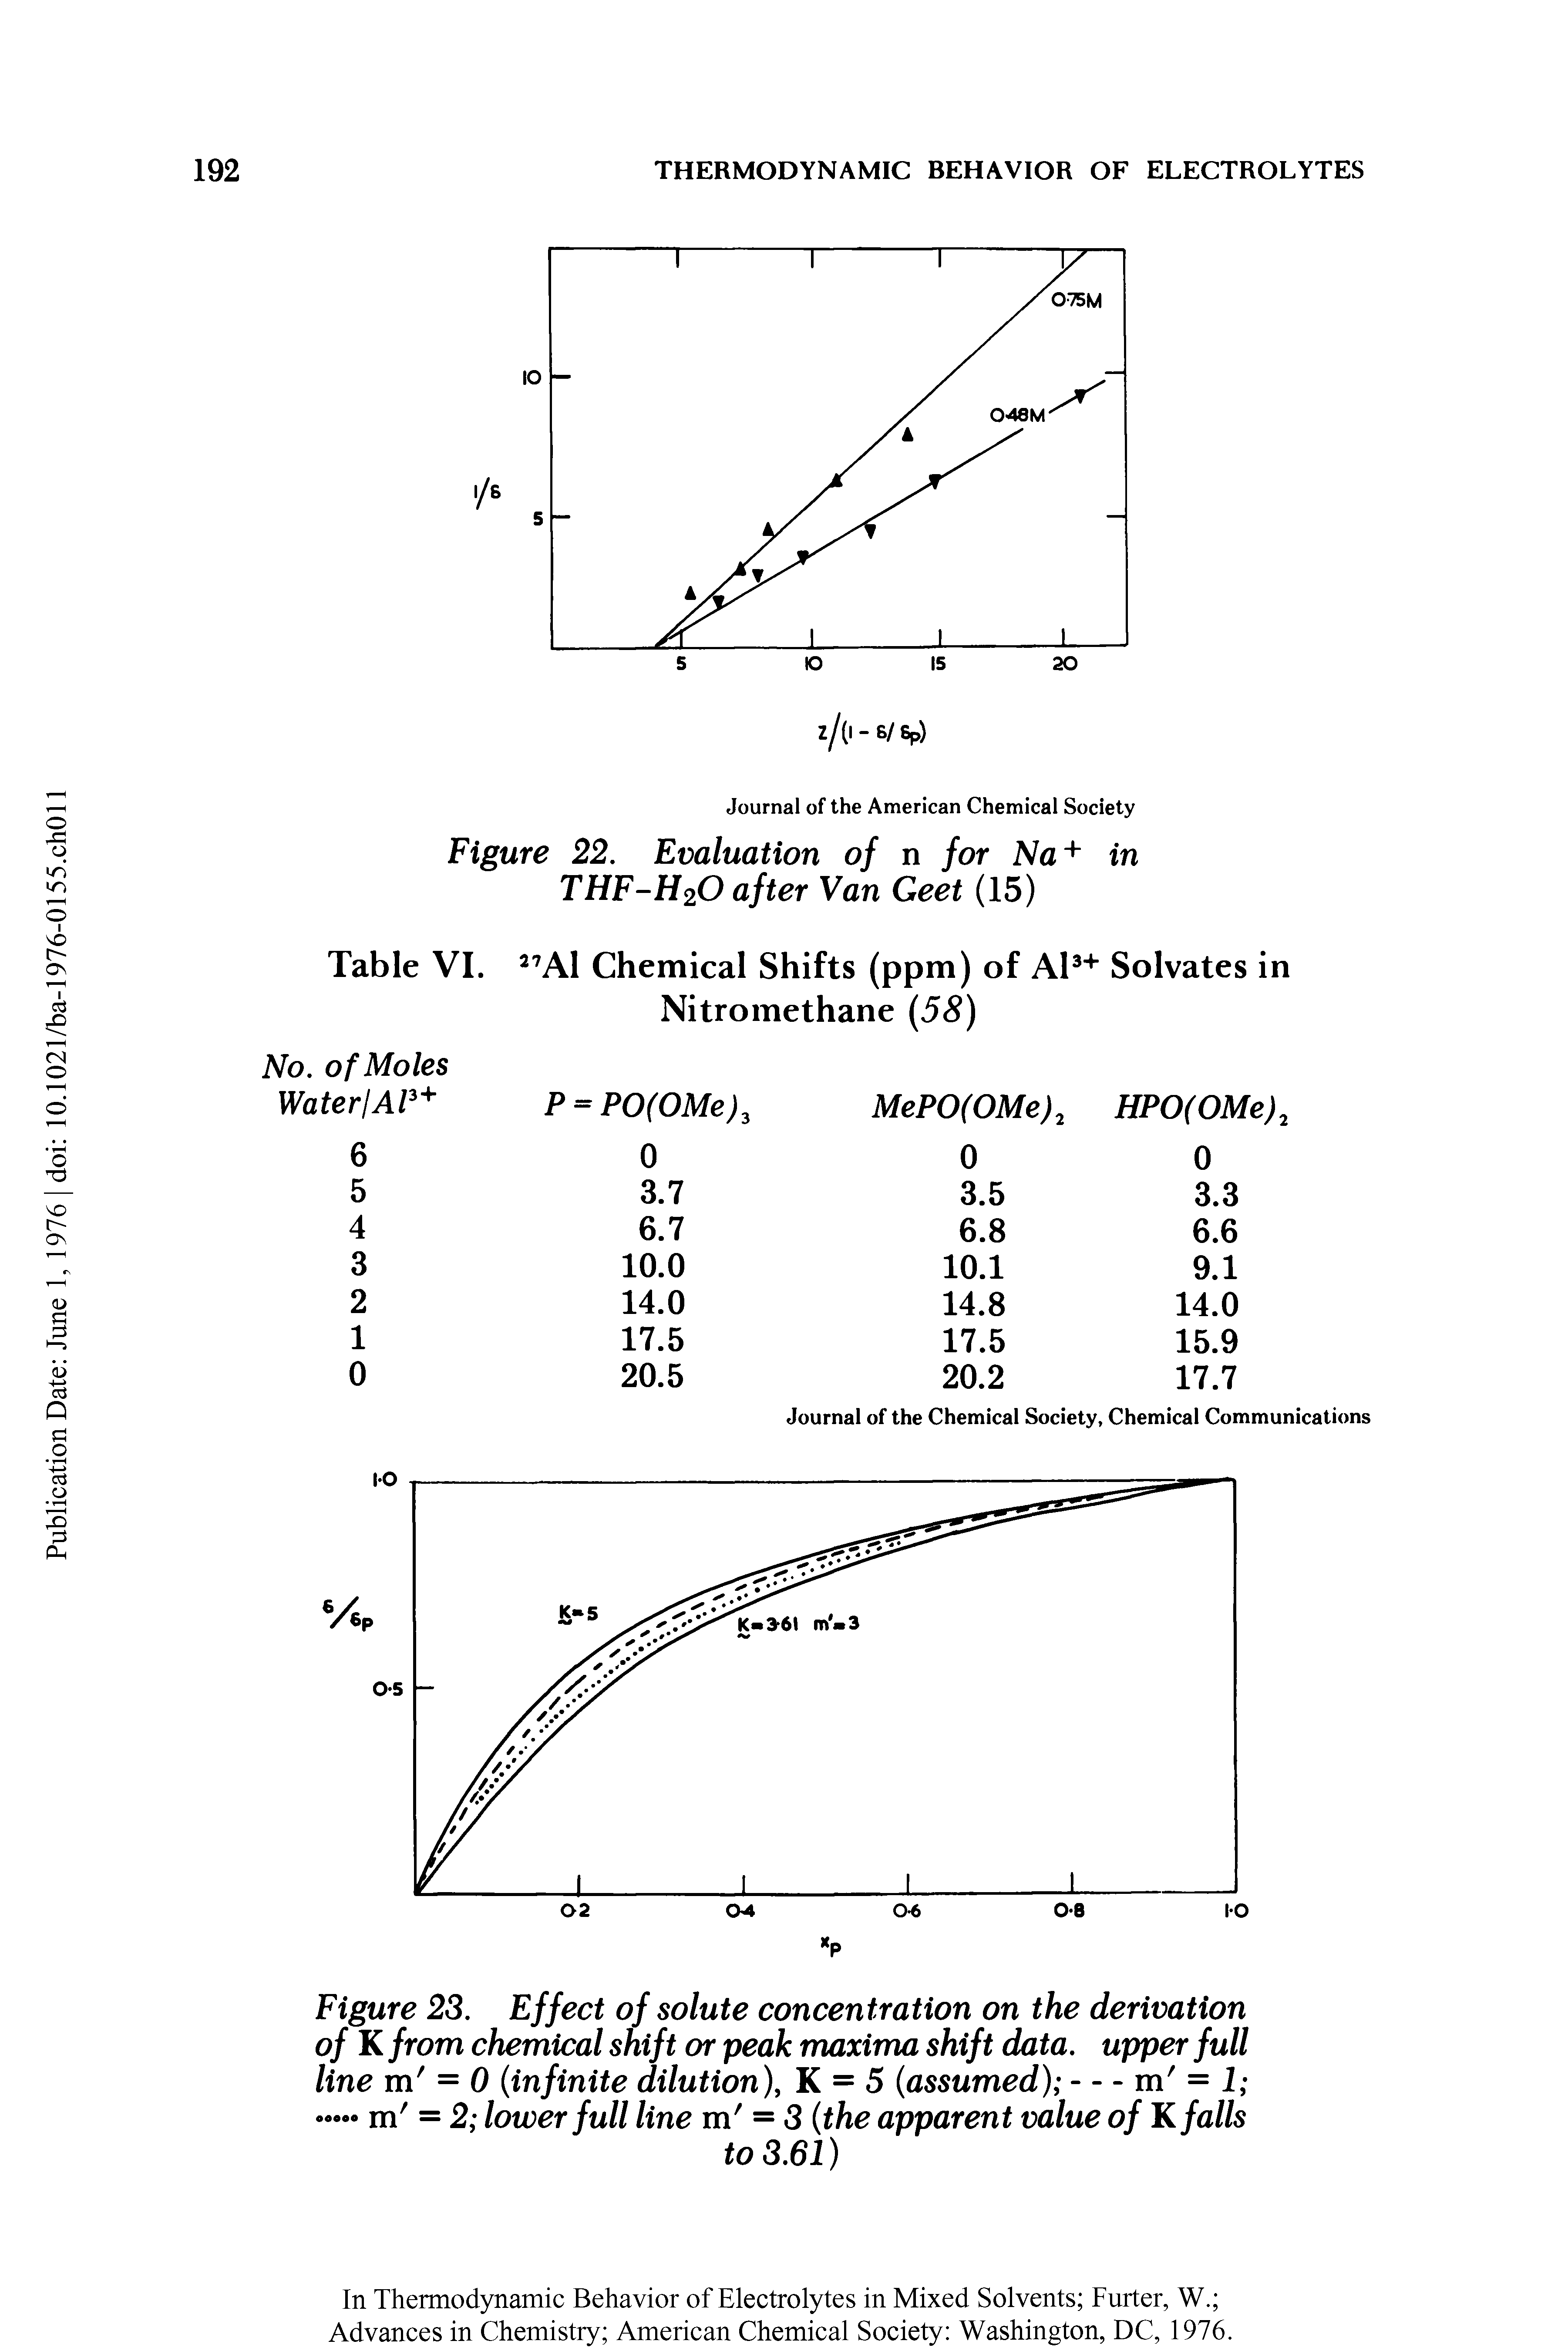 Figure 23. Effect of solute concentration on the derivation of K from chemical shift or peak maxima shift data, upper full line m = 0 (infinite dilution), K = 5 (assumed) — m = 1 . m = 2 lower full line m = 3 (the apparent value of K falls...